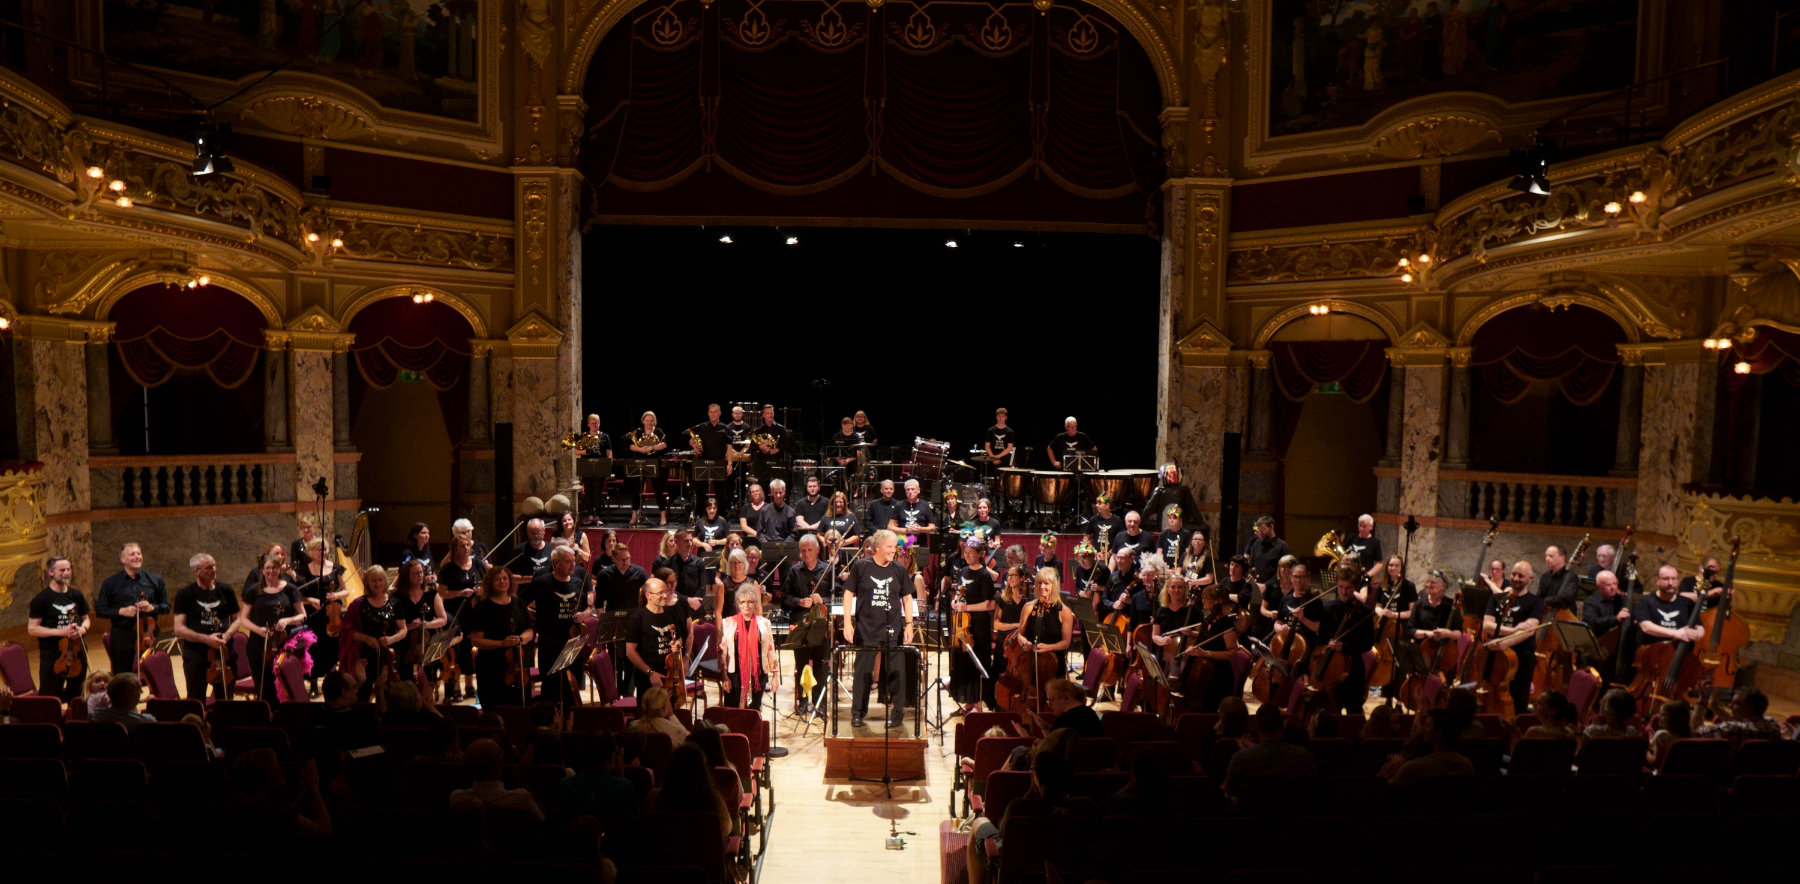 Harrogate Symphony Orchestra at the Royal Hall in Harrogate